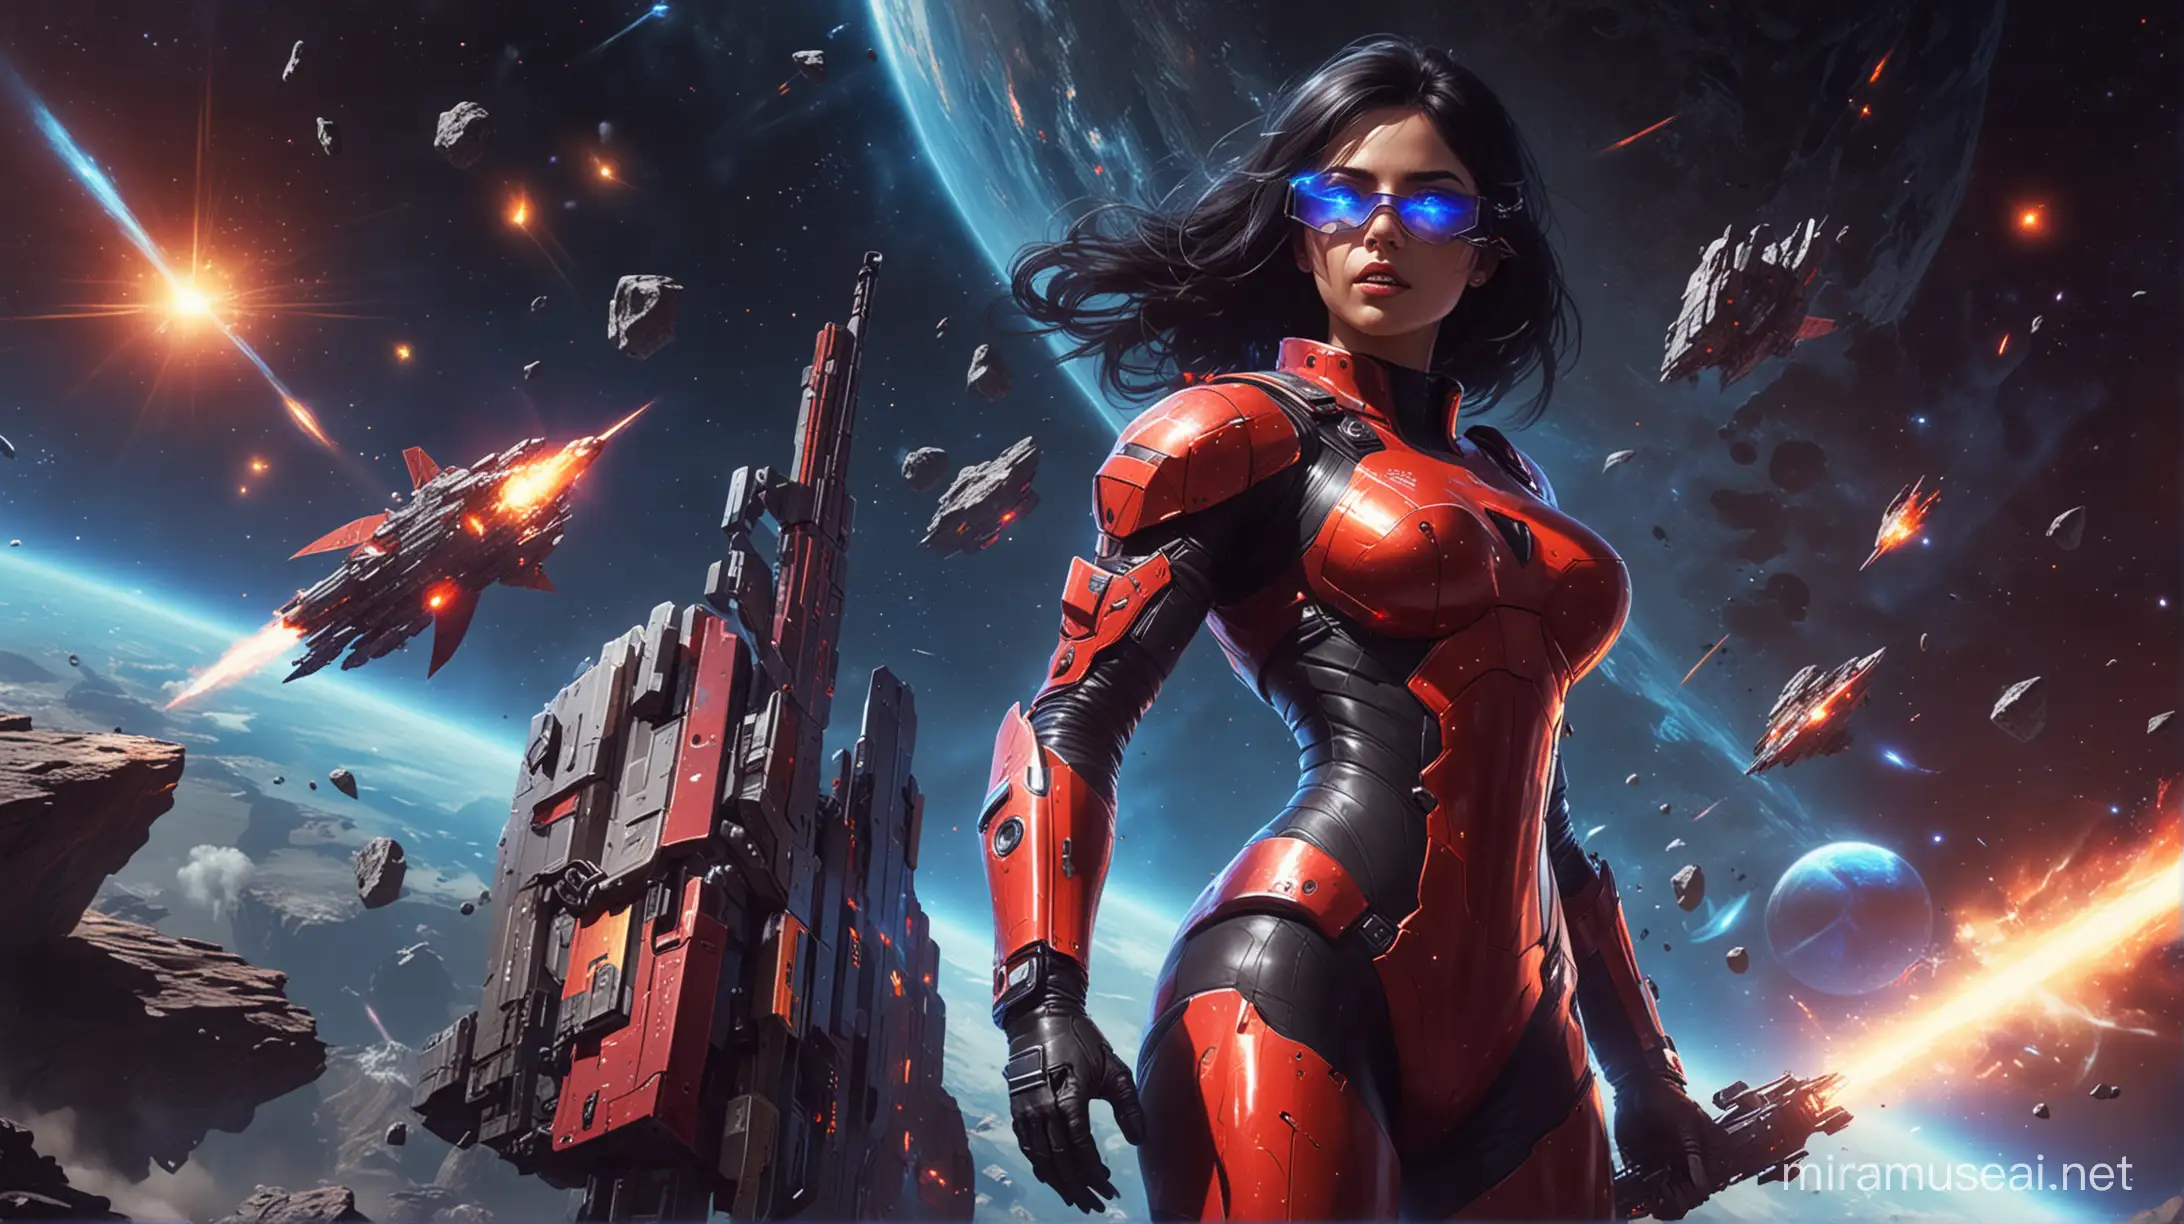 Futuristic Space Knightess in Red Suit with Glowing Blue Accents